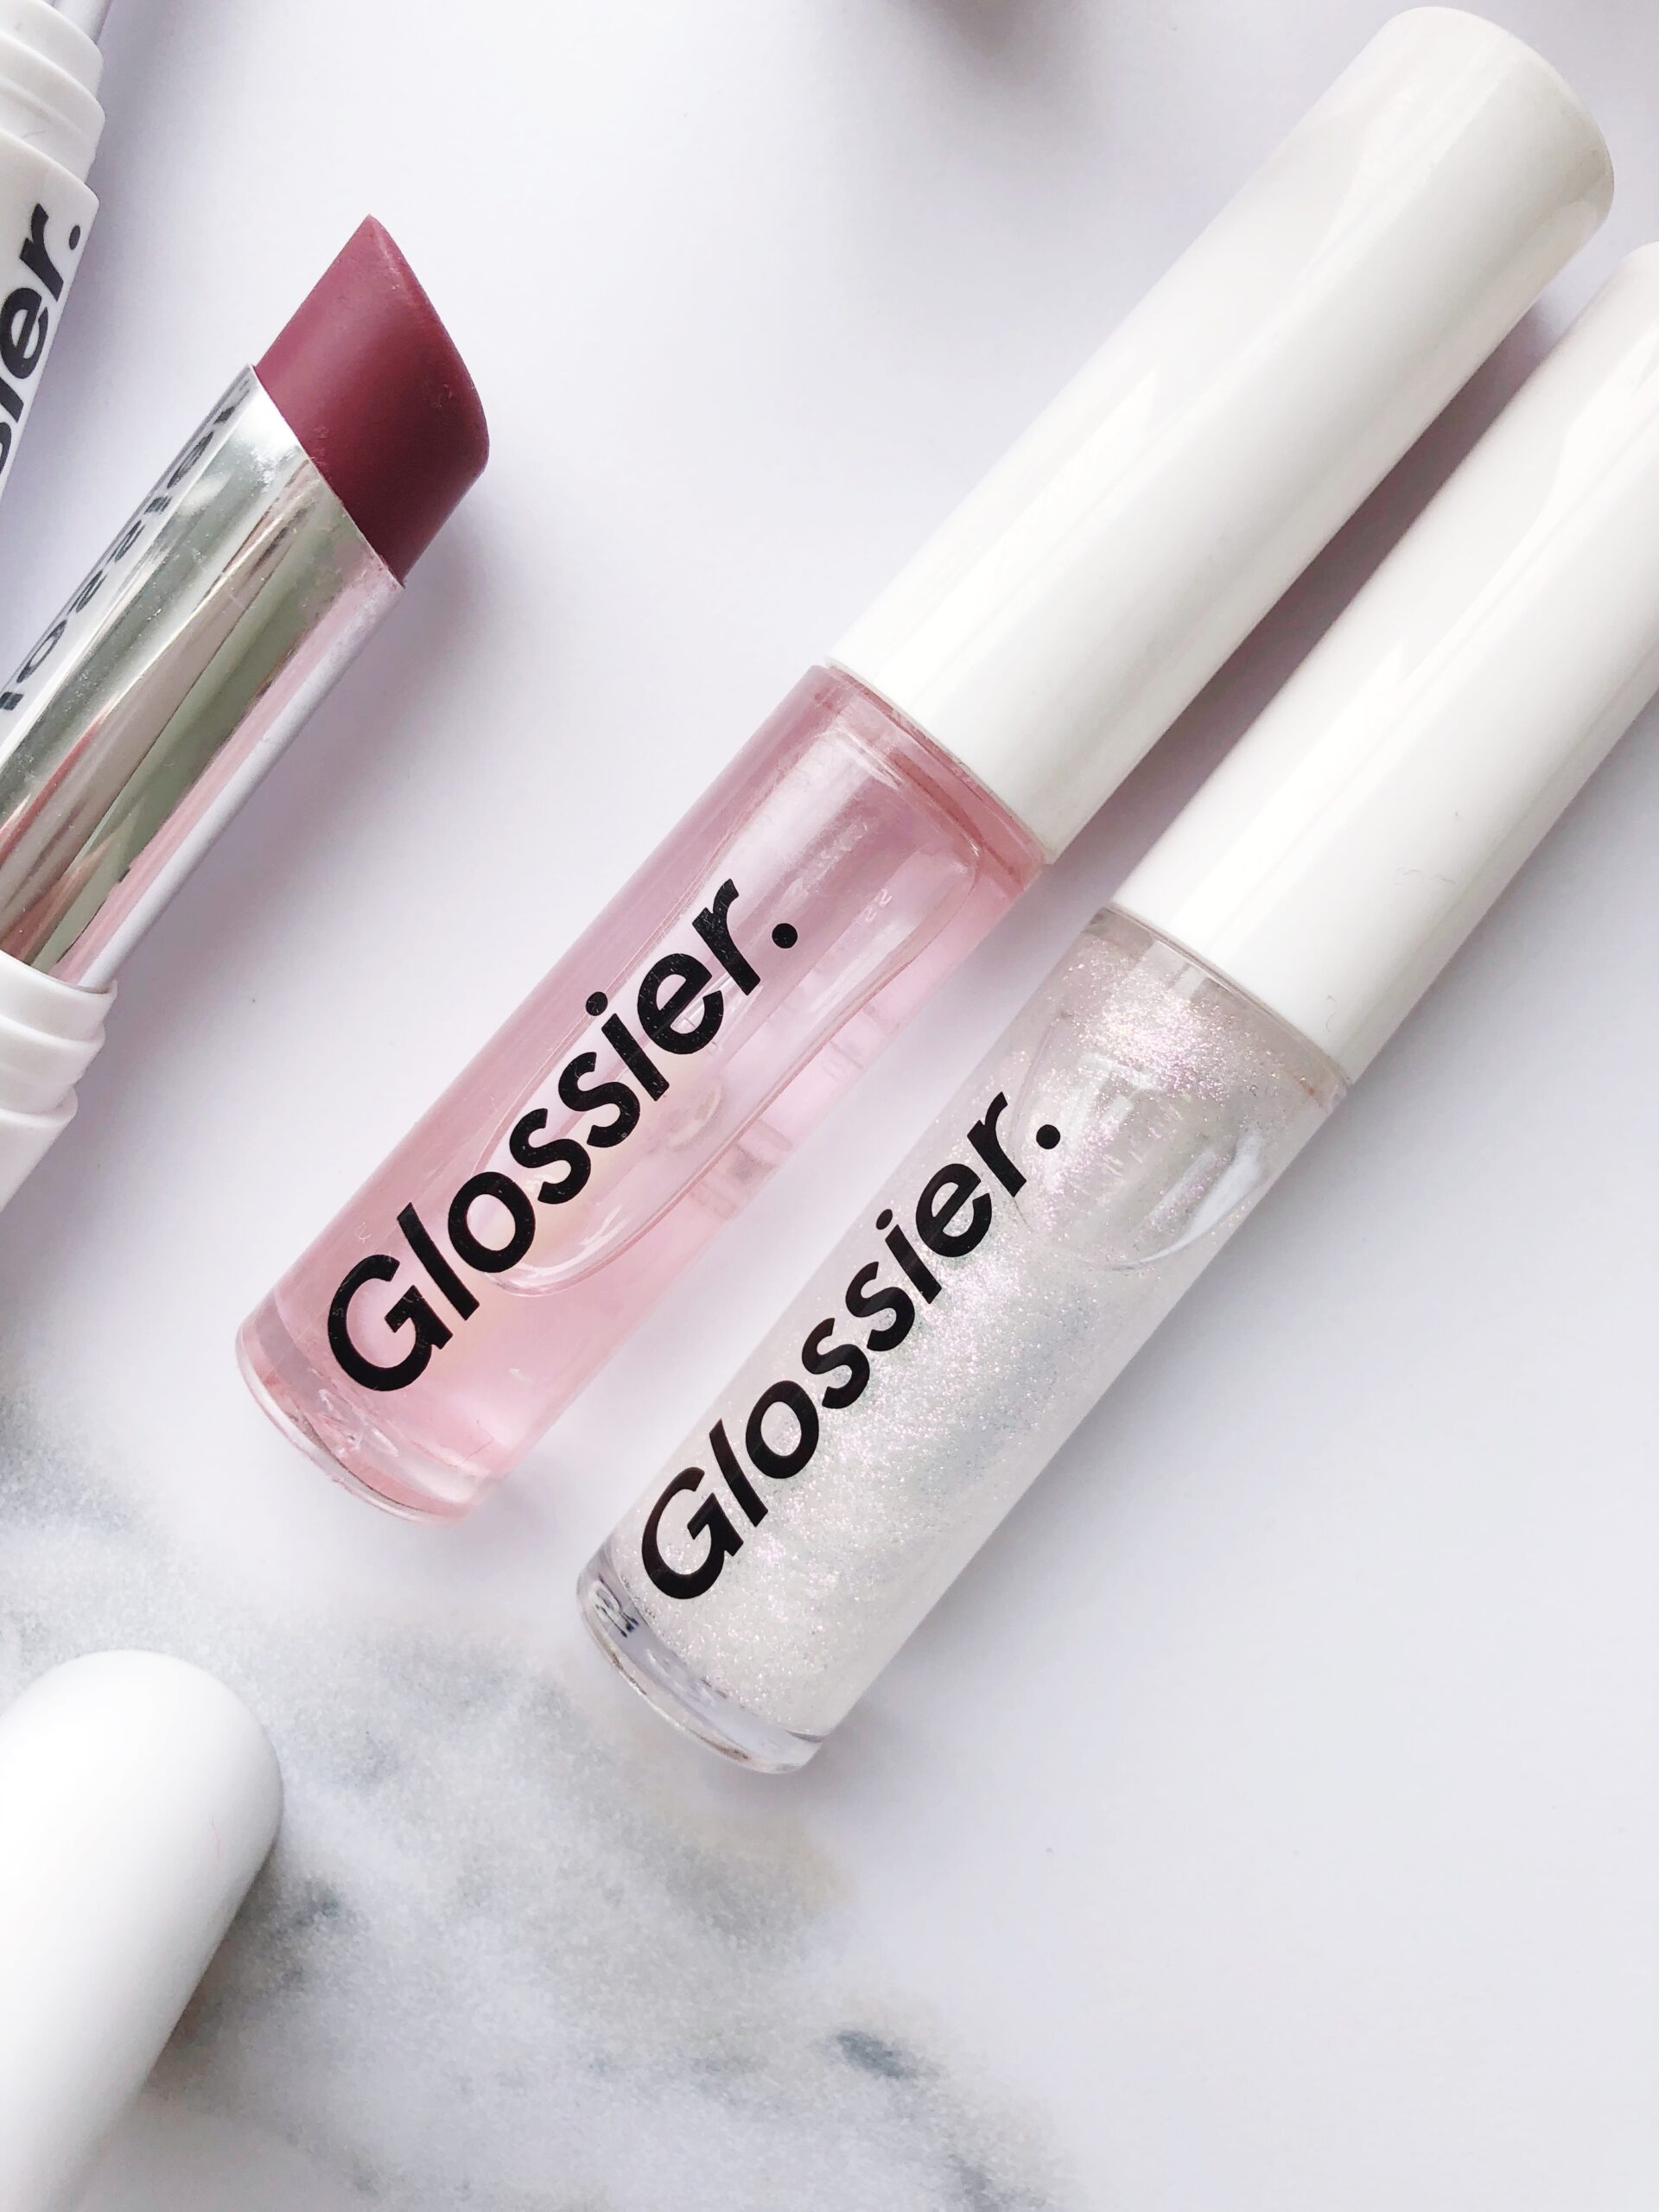 Top 5 Best Glossier Lip Products For Summer The Beauty Minimalist